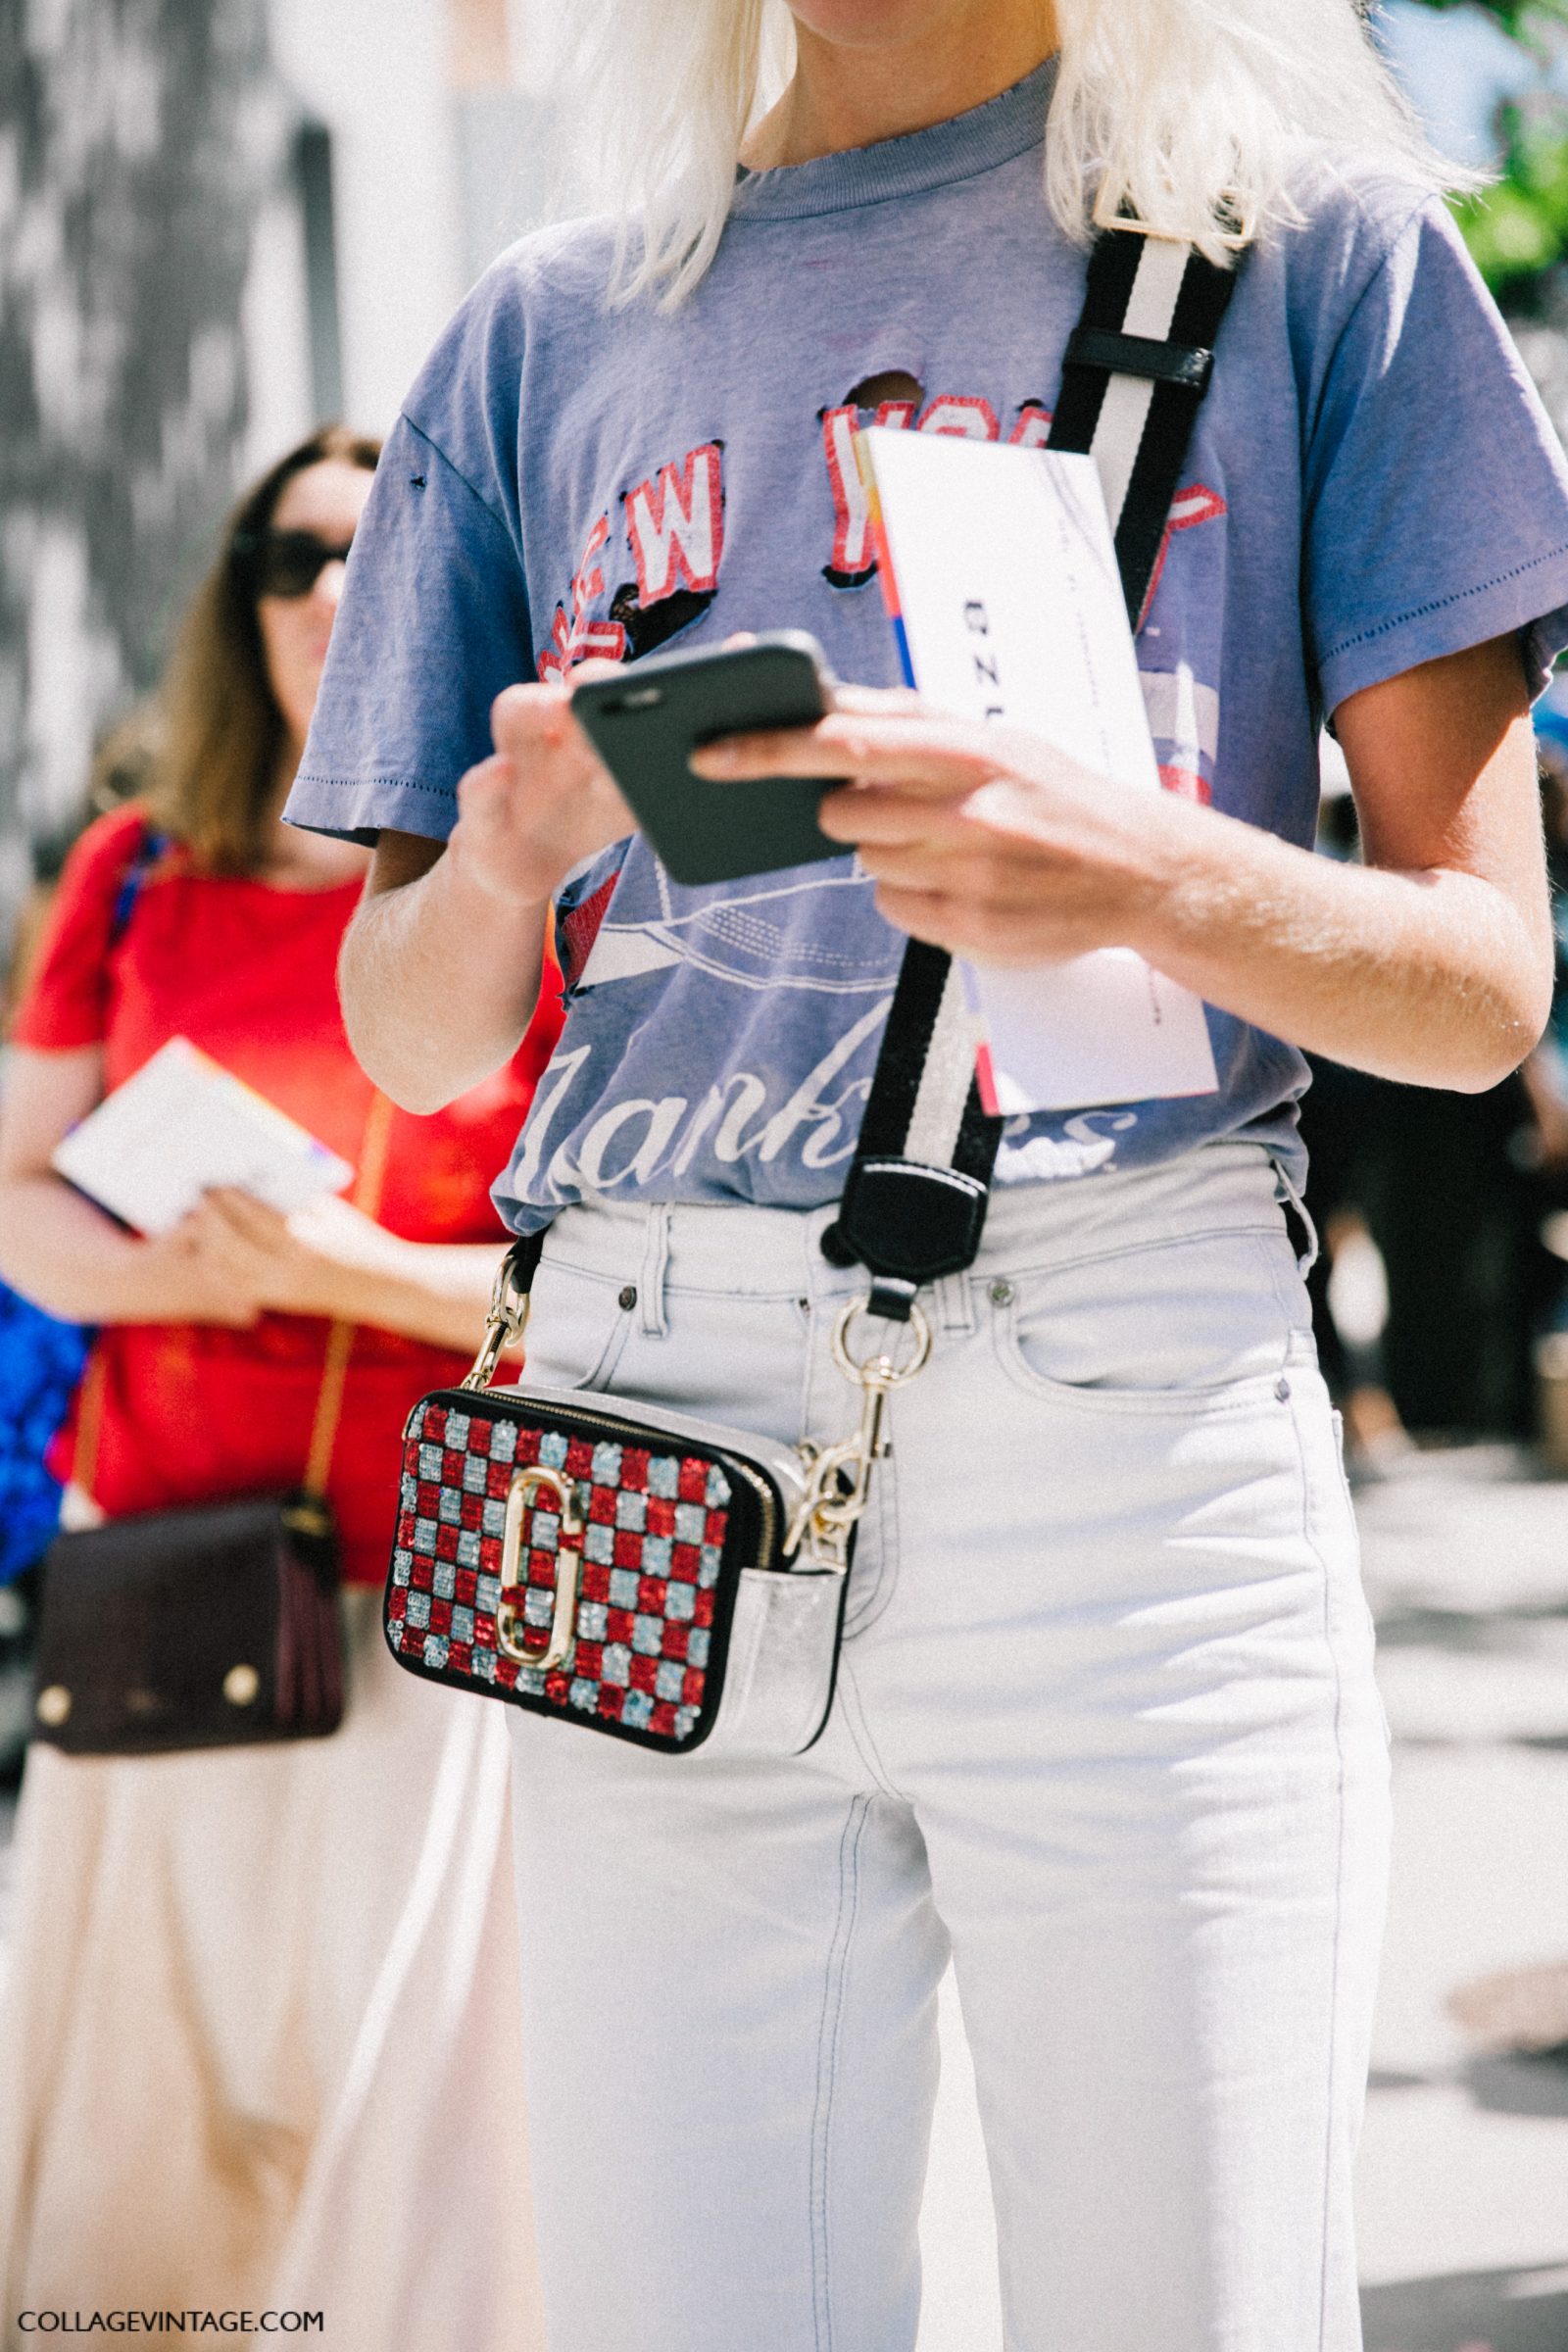 nyfw-new_york_fashion_week_ss17-street_style-outfits-collage_vintage-vintage-phillip_lim-the-row-proenza_schouler-rossie_aussolin-237